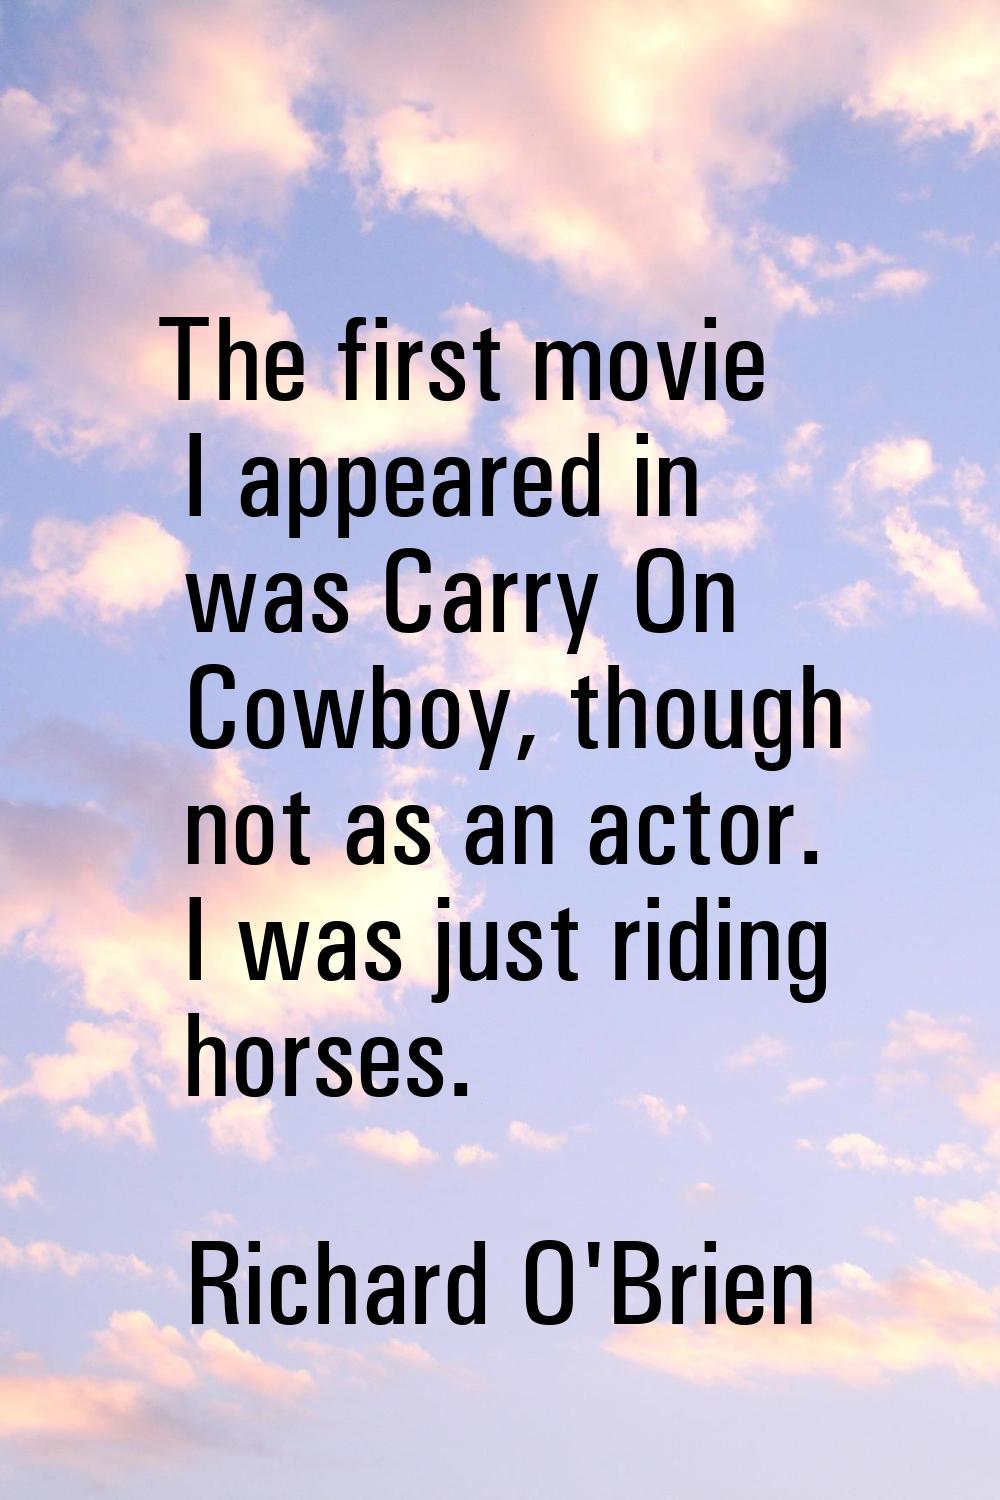 The first movie I appeared in was Carry On Cowboy, though not as an actor. I was just riding horses